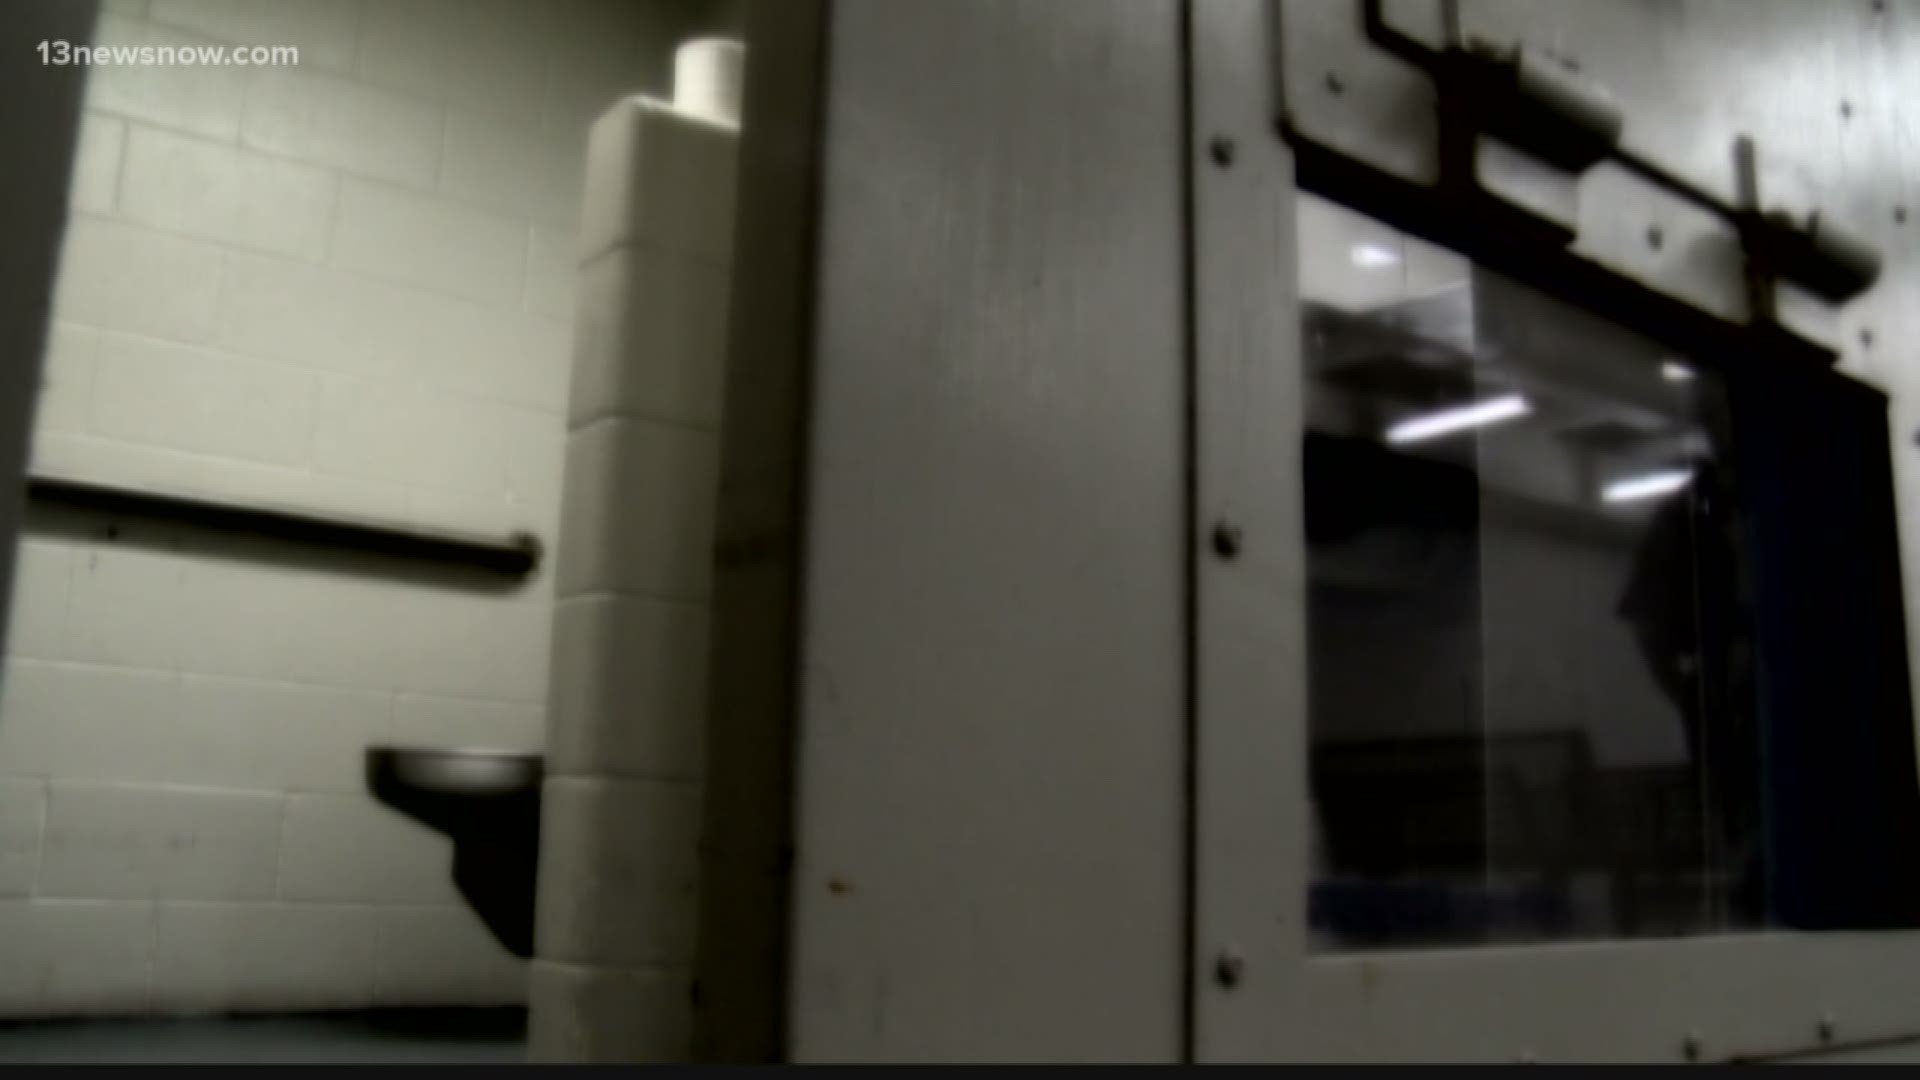 New concerns from those leading corrections officers inside Virginia's prisons.